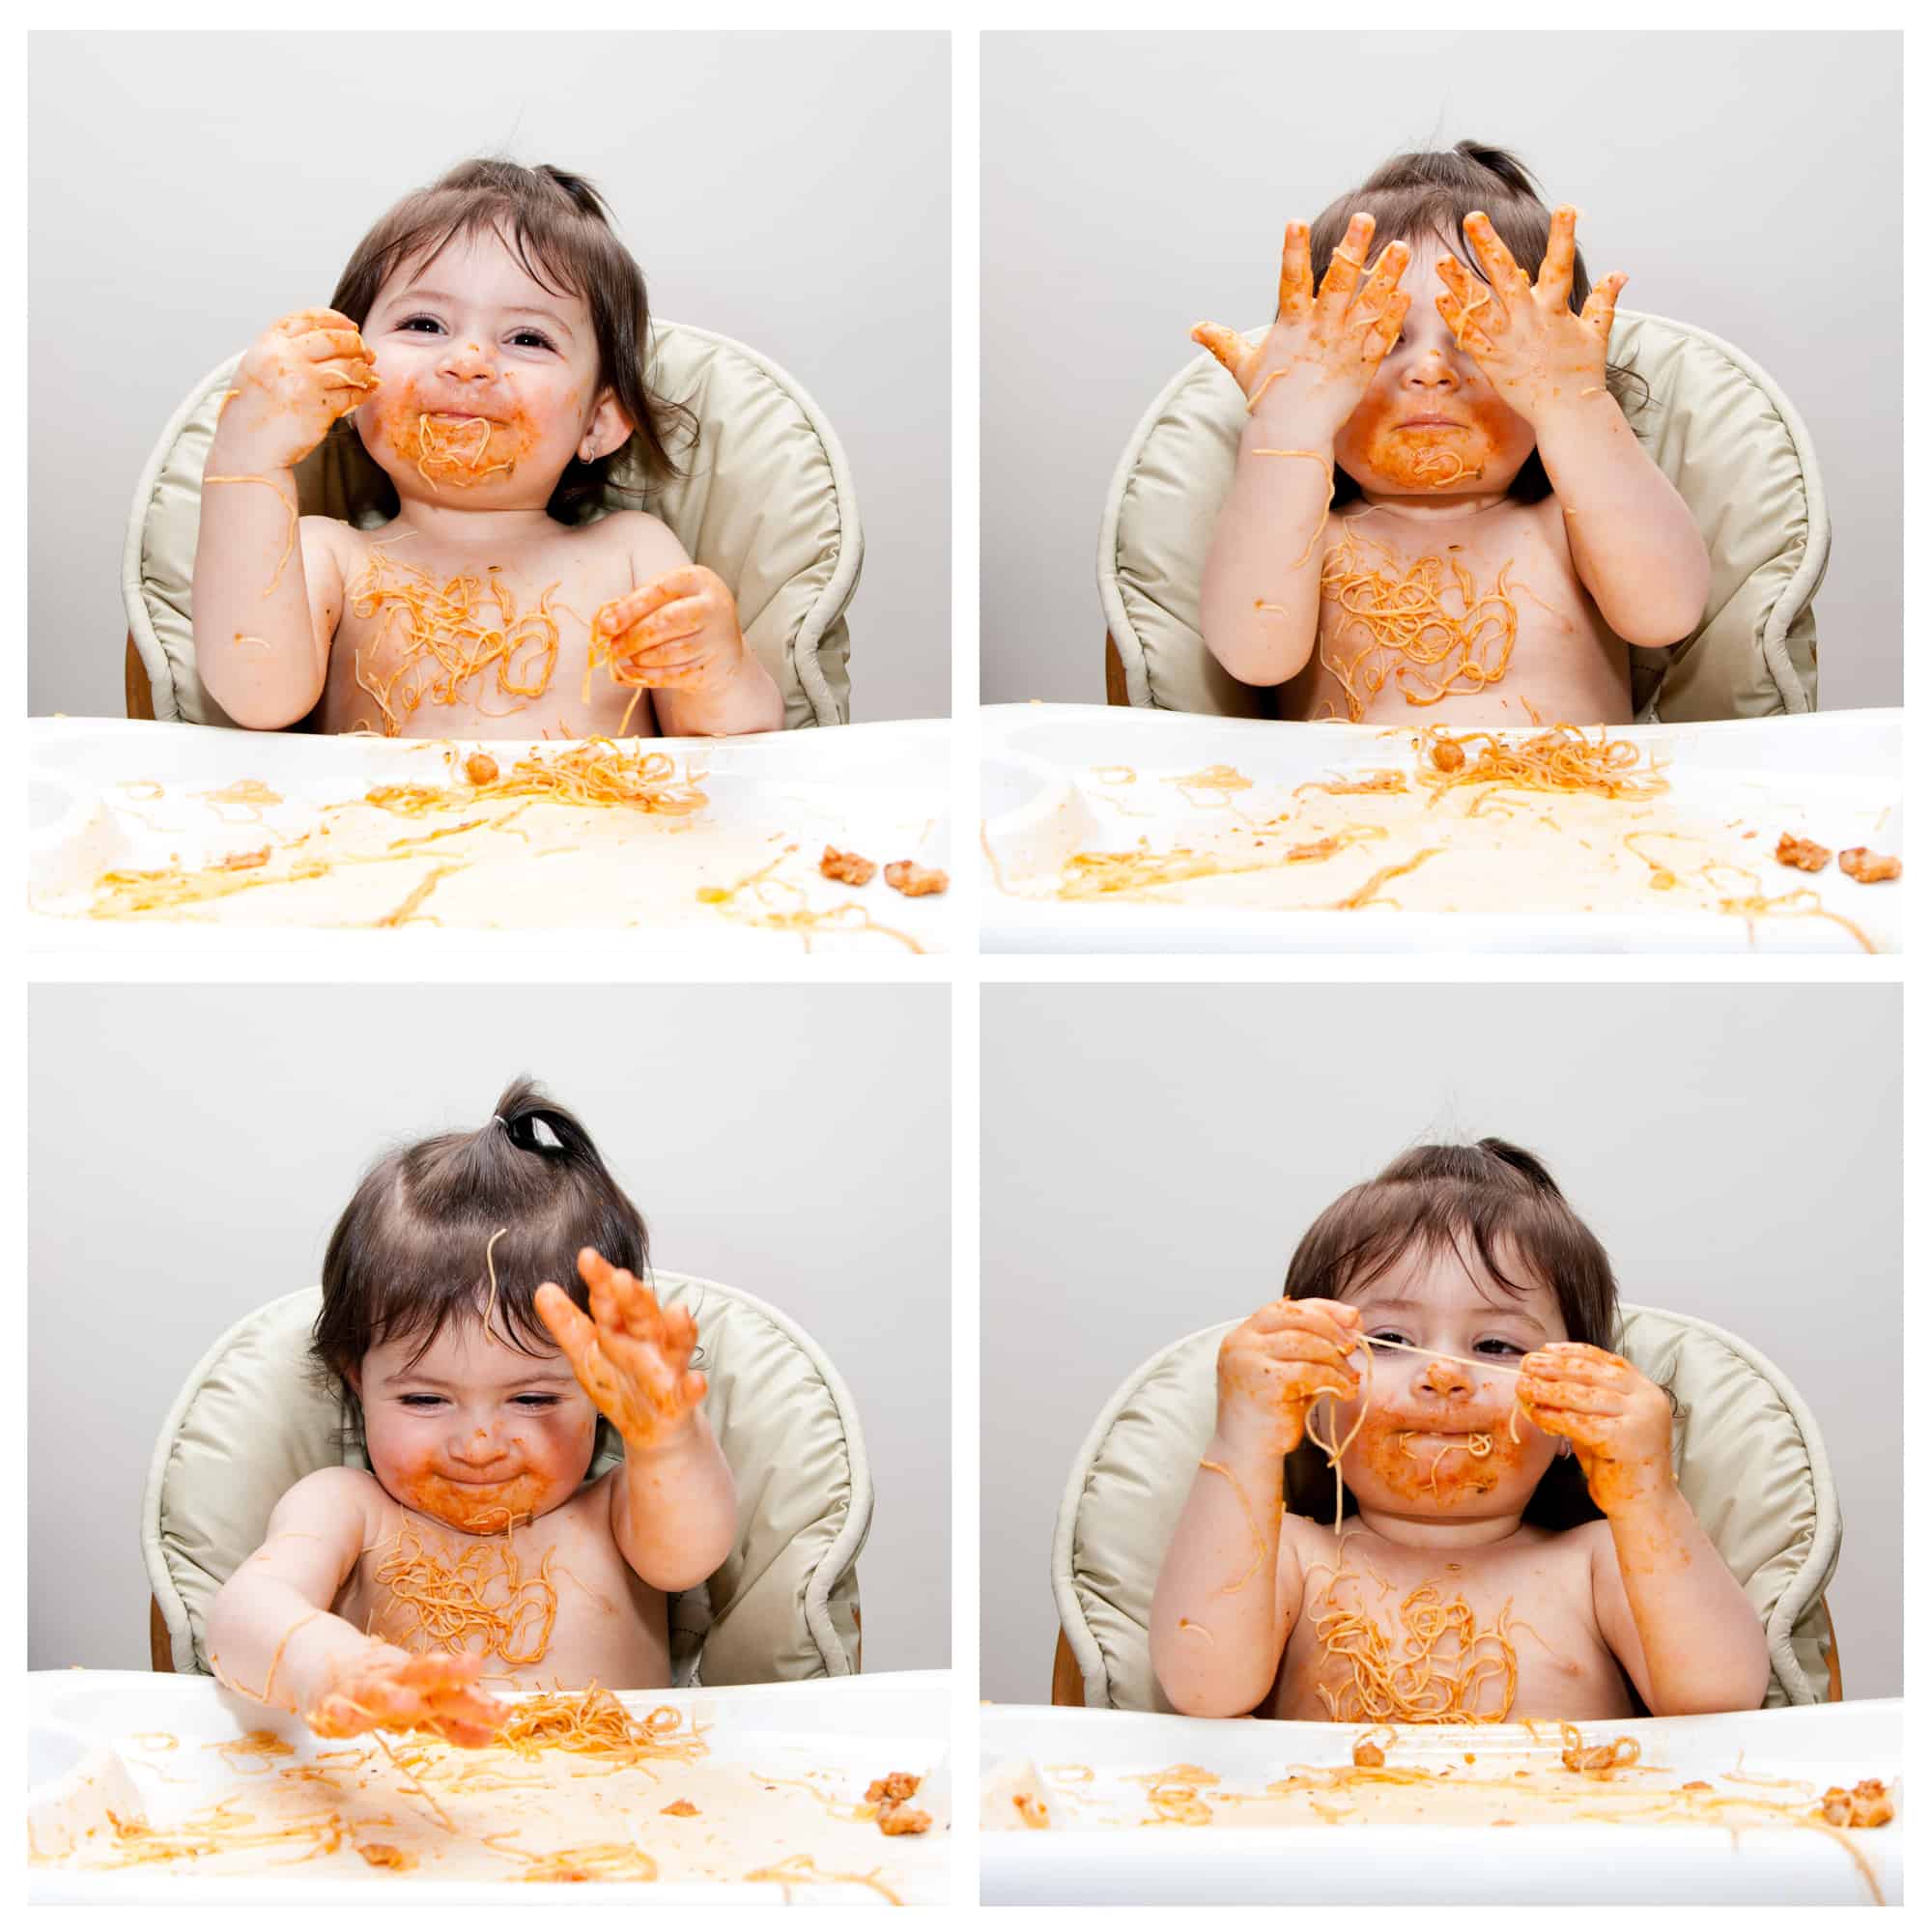 Happy baby having fun eating messy showing hands covered in Spaghetti Angel Hair Pasta red marinara tomato sauce.